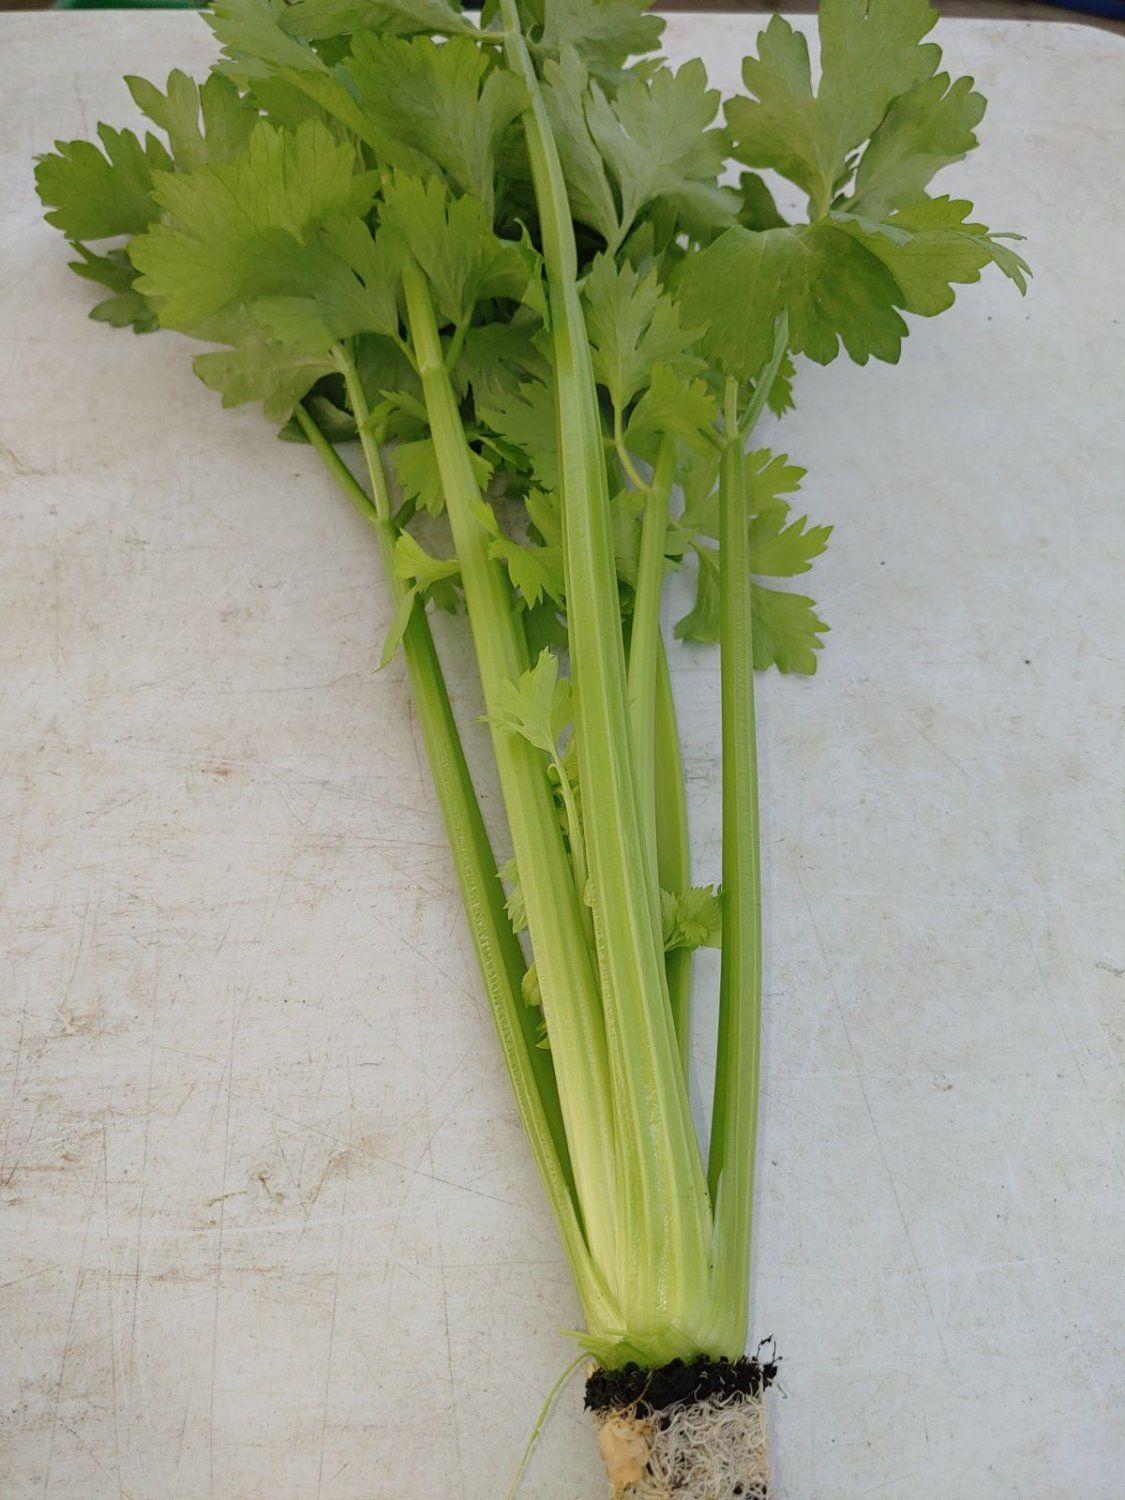 Previous Happening: Fresh Harvest Alert: Celery from Southern Alberta and More!